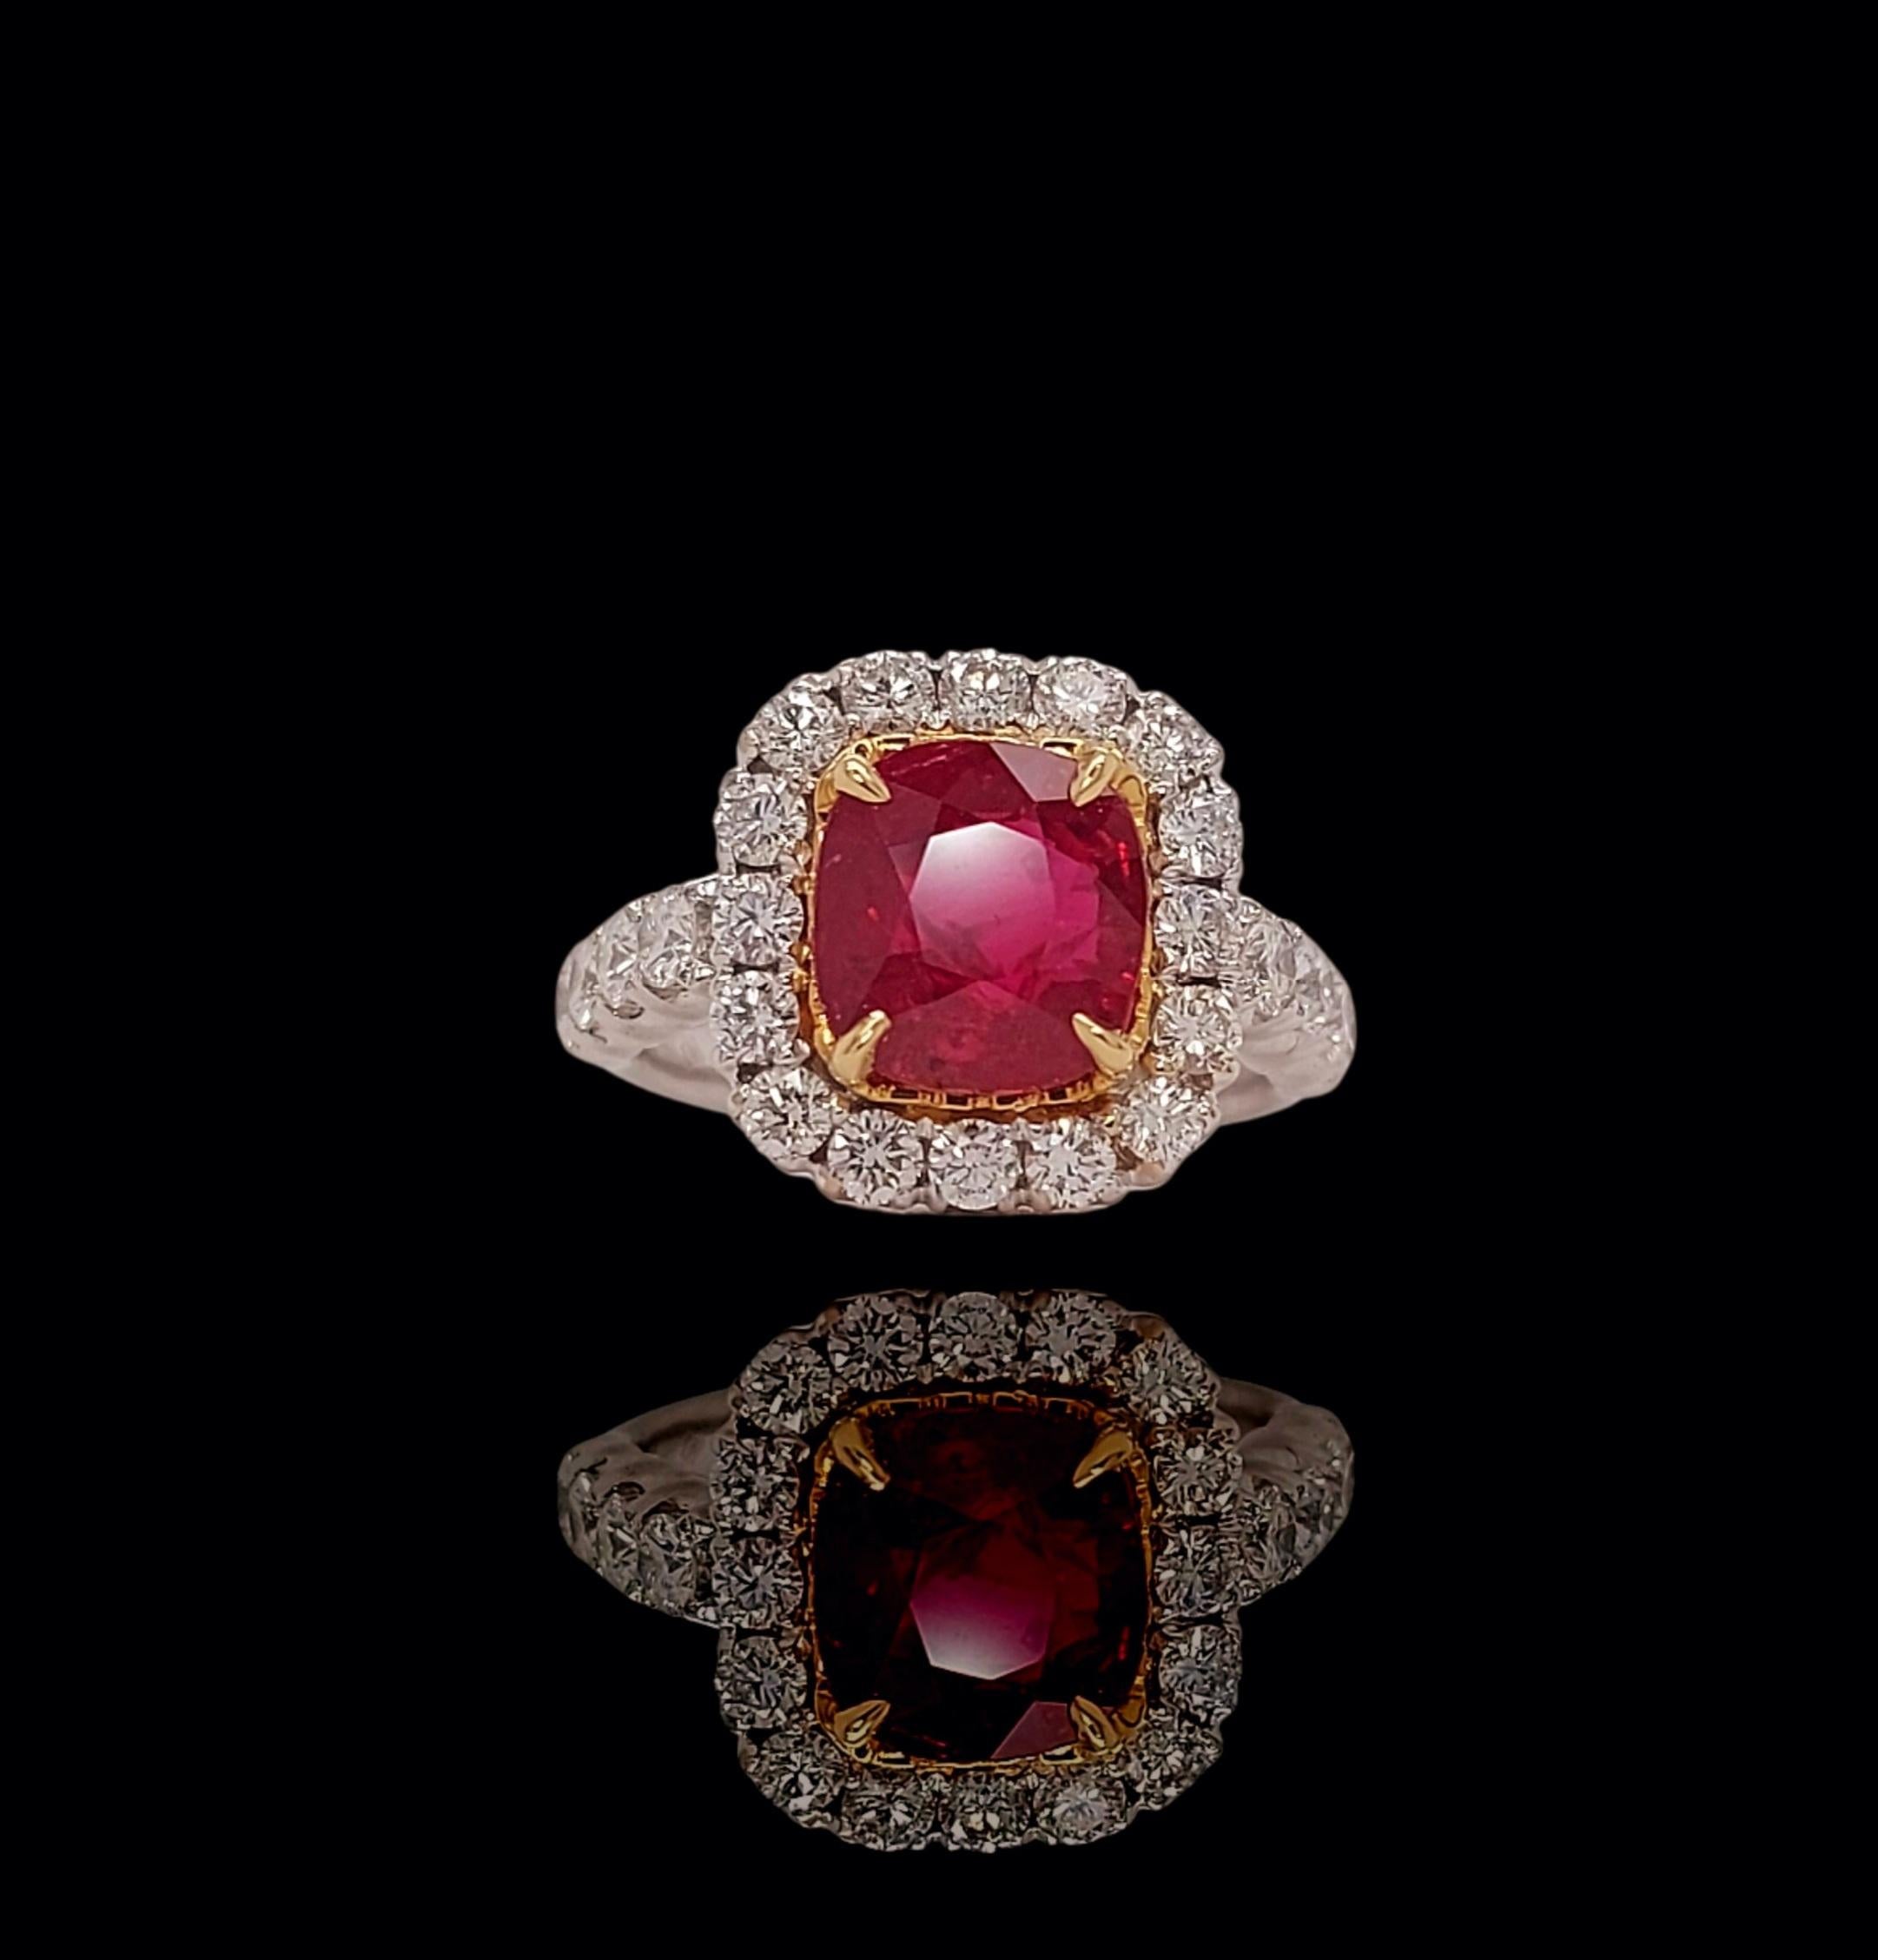 Magnificent 18kt White Gold  4.02ct No Heat Vivid Red Ruby Ring, With 1.52ct Diamonds With CGL Certificate

Ruby: Cushion / Brilliant - Step cut, Vivid red, Transparent, No indication of heating Mozambique Ruby, 4.02ct

Comes with a Carat Gem Lab